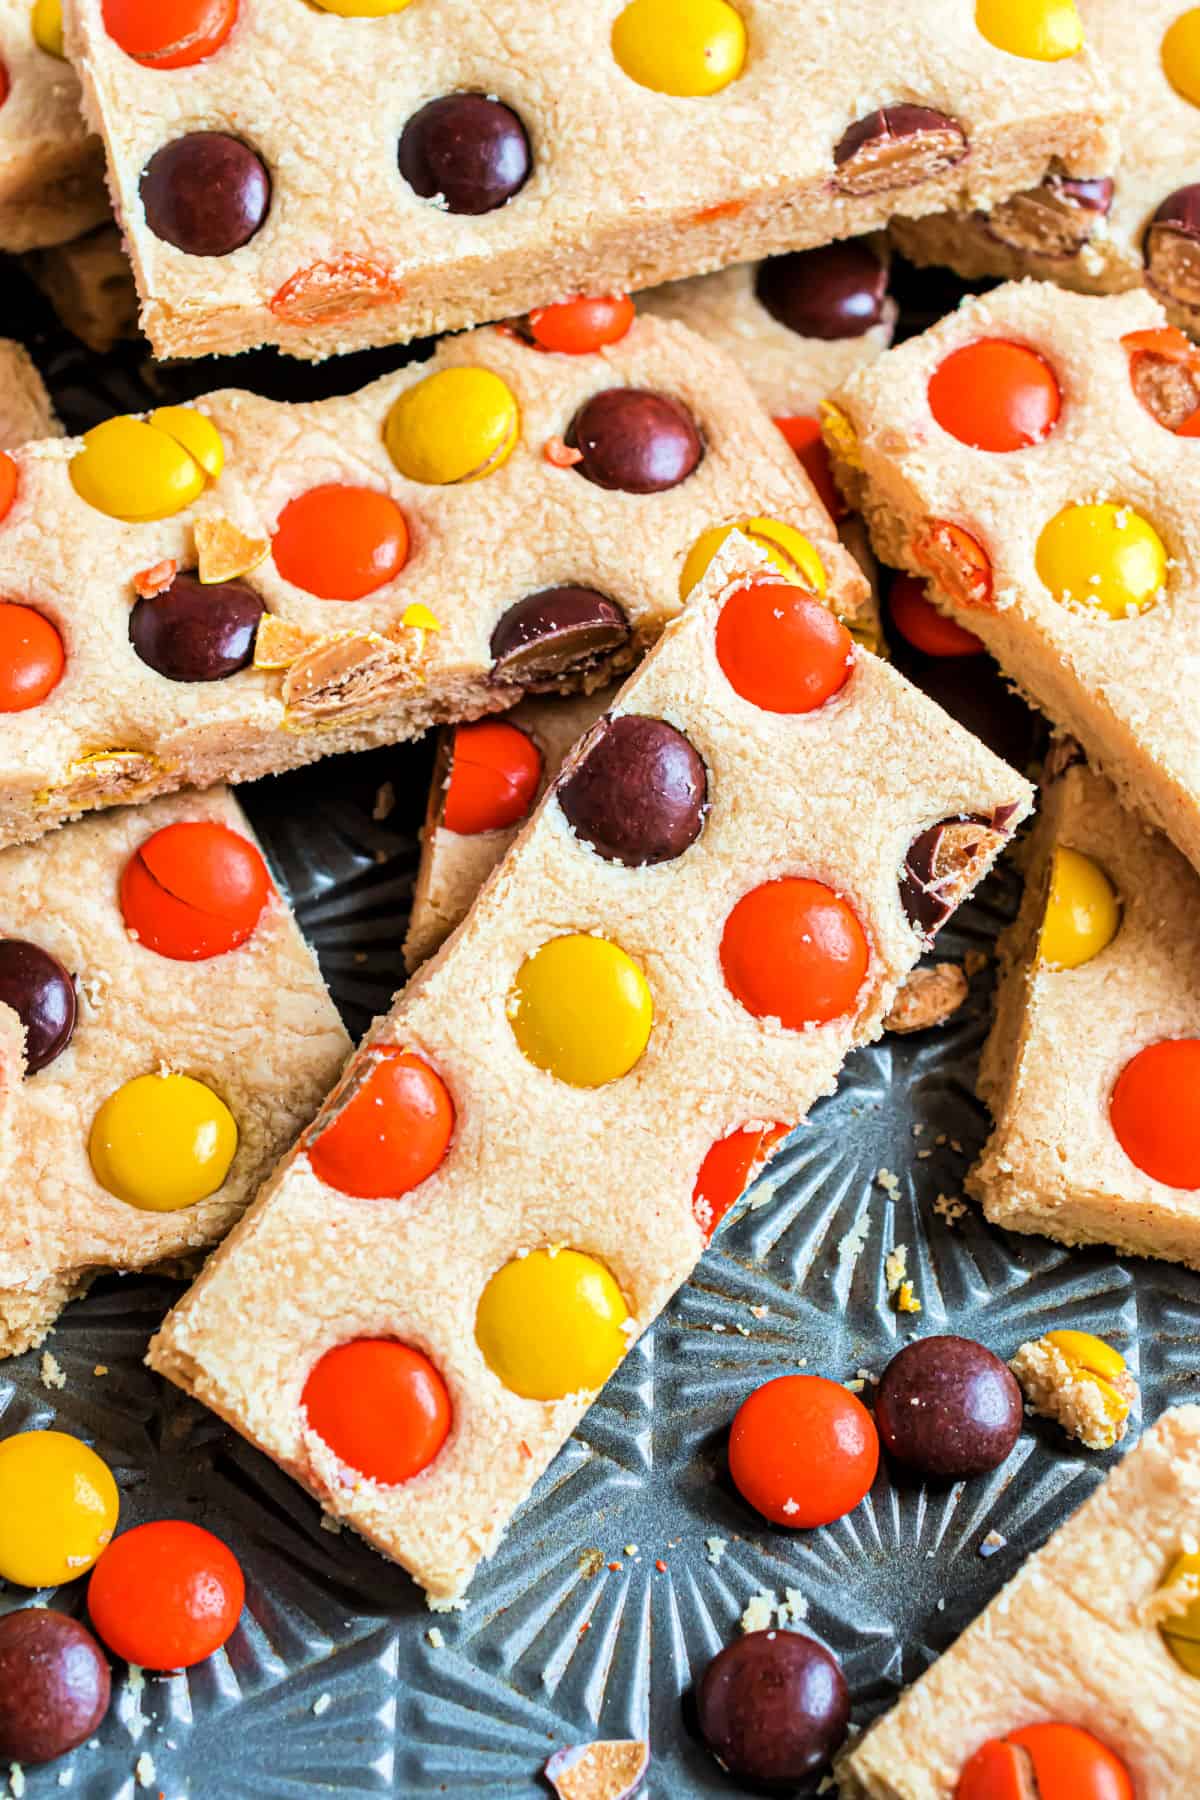 Peanut butter and reese's shortbread bars on a metal baking sheet.